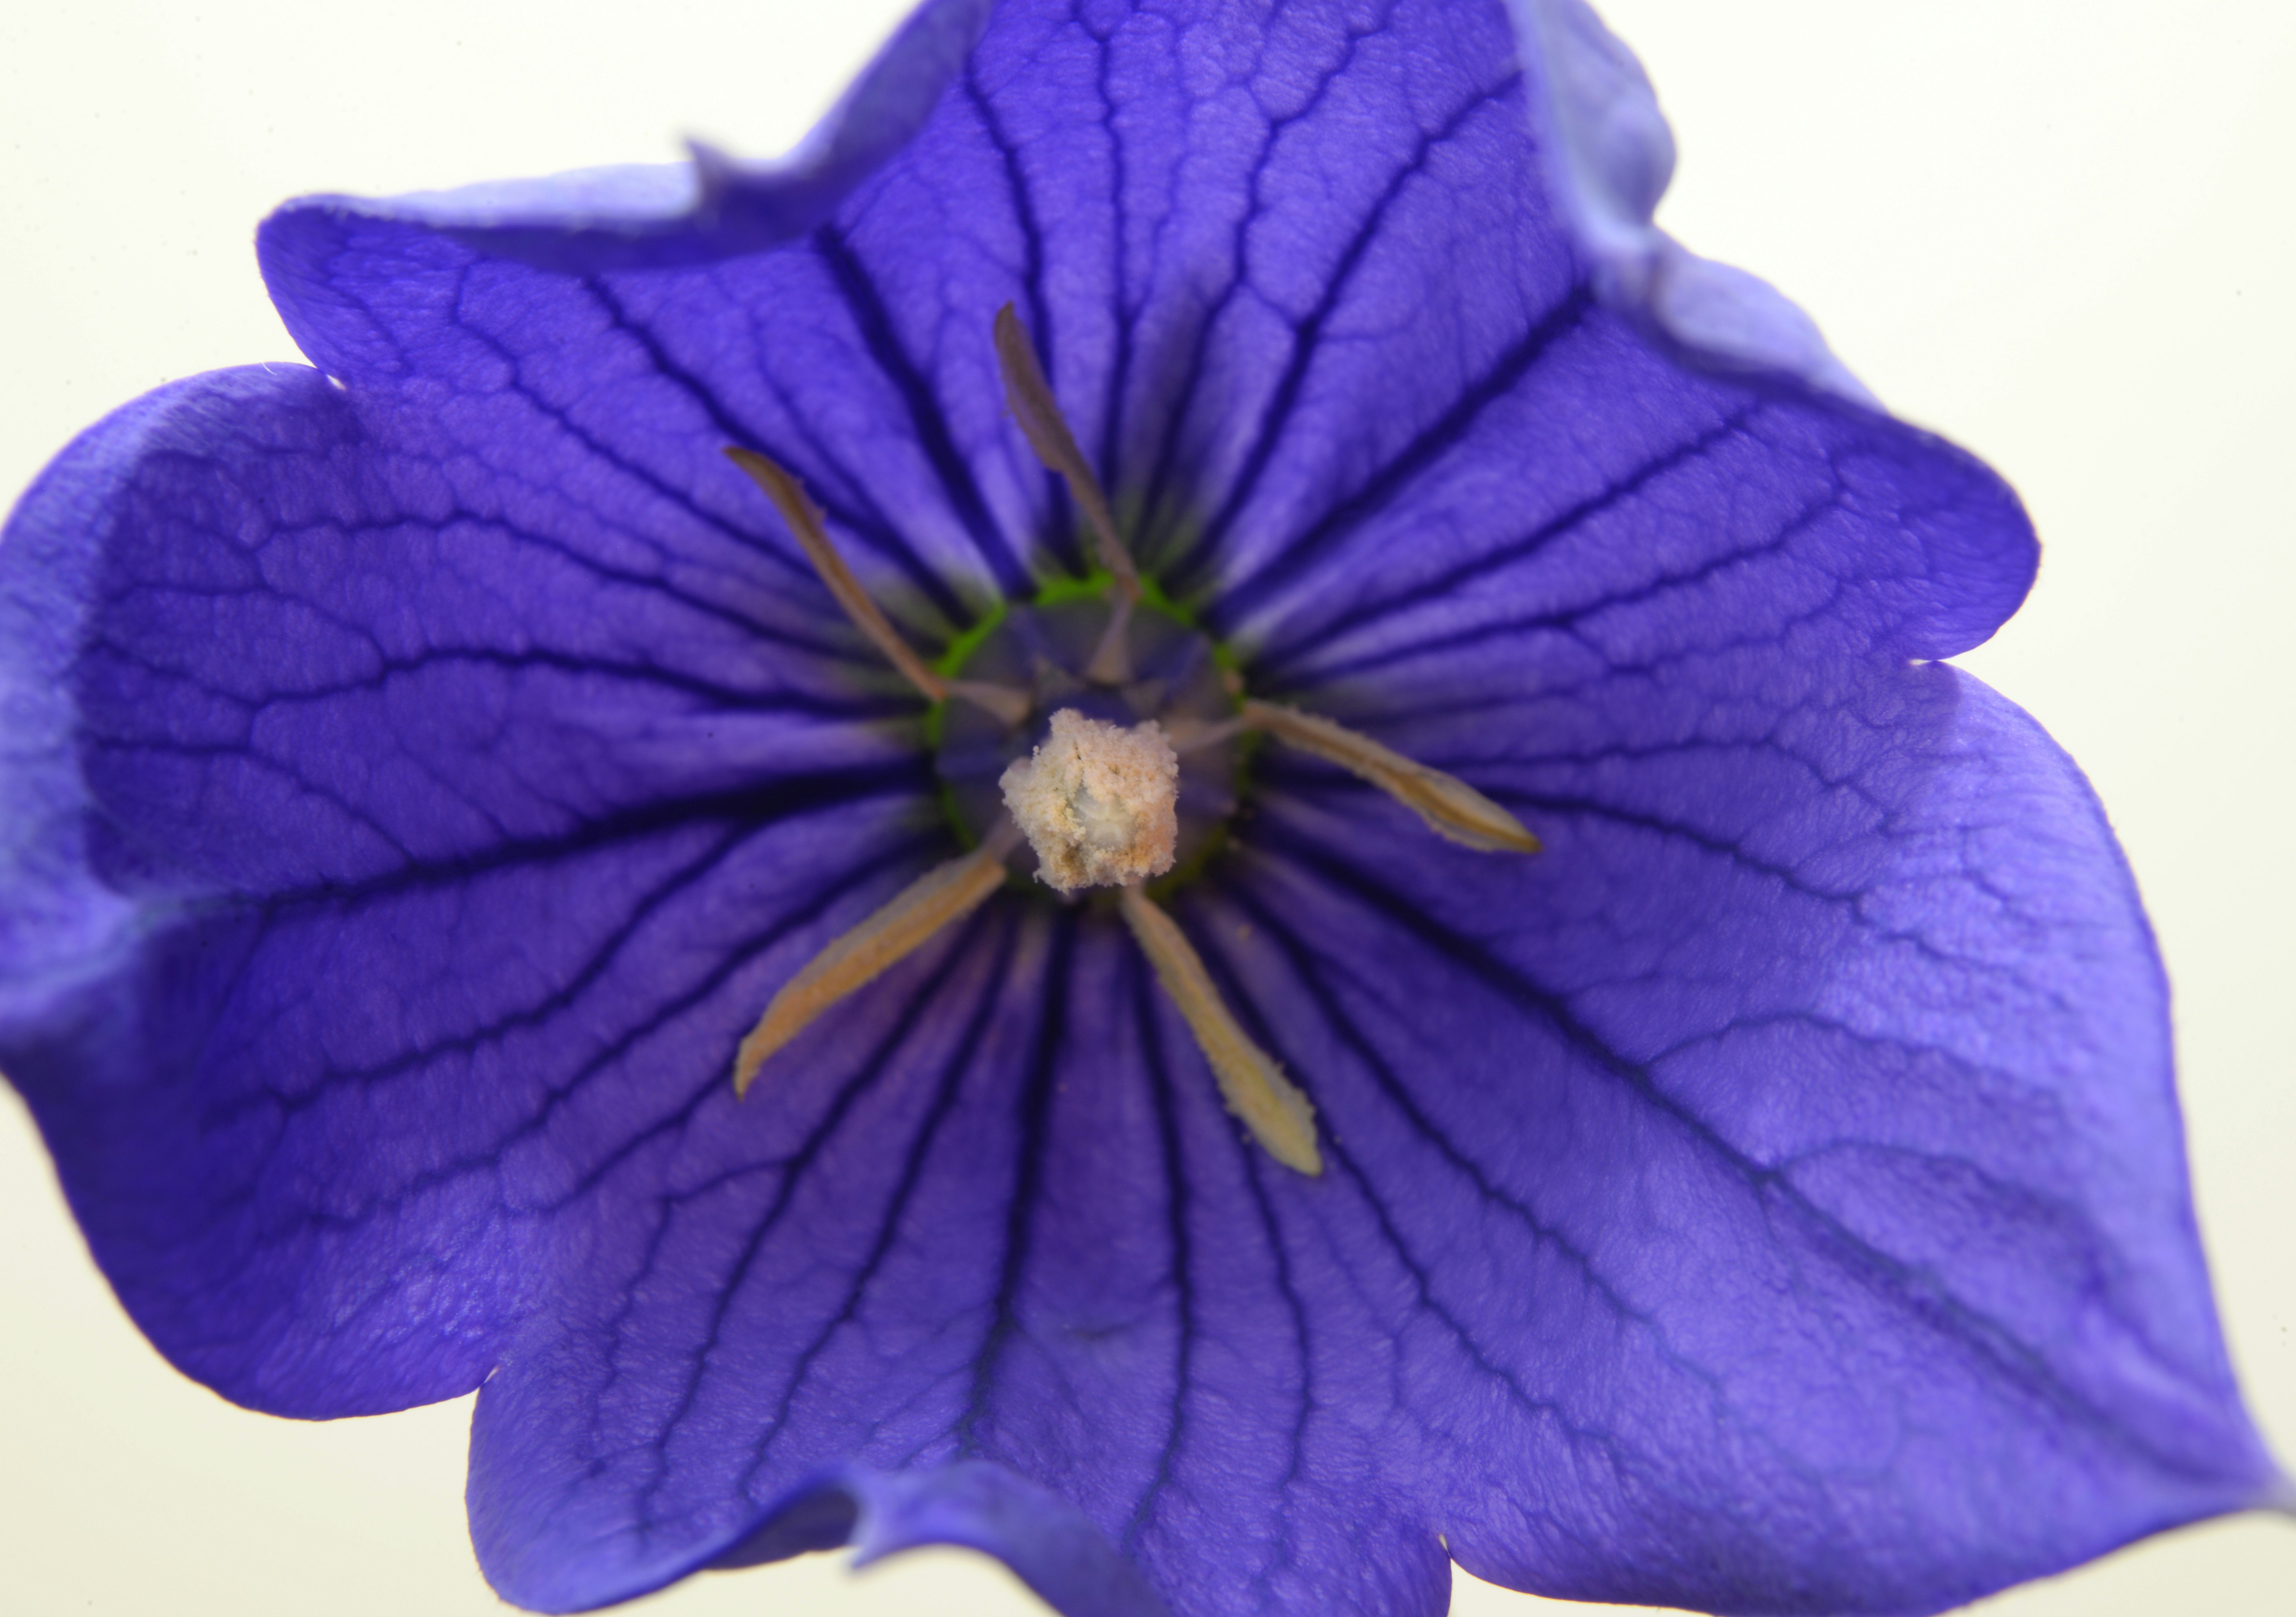 This is an open balloon flower, also known as Chinese bellflower or Platycodon. Before opening, the flower bud resembles a balloon. Now, however, it has a star shape. Inside, you can see the five anthers spread apart, and the center style covered with pollen.